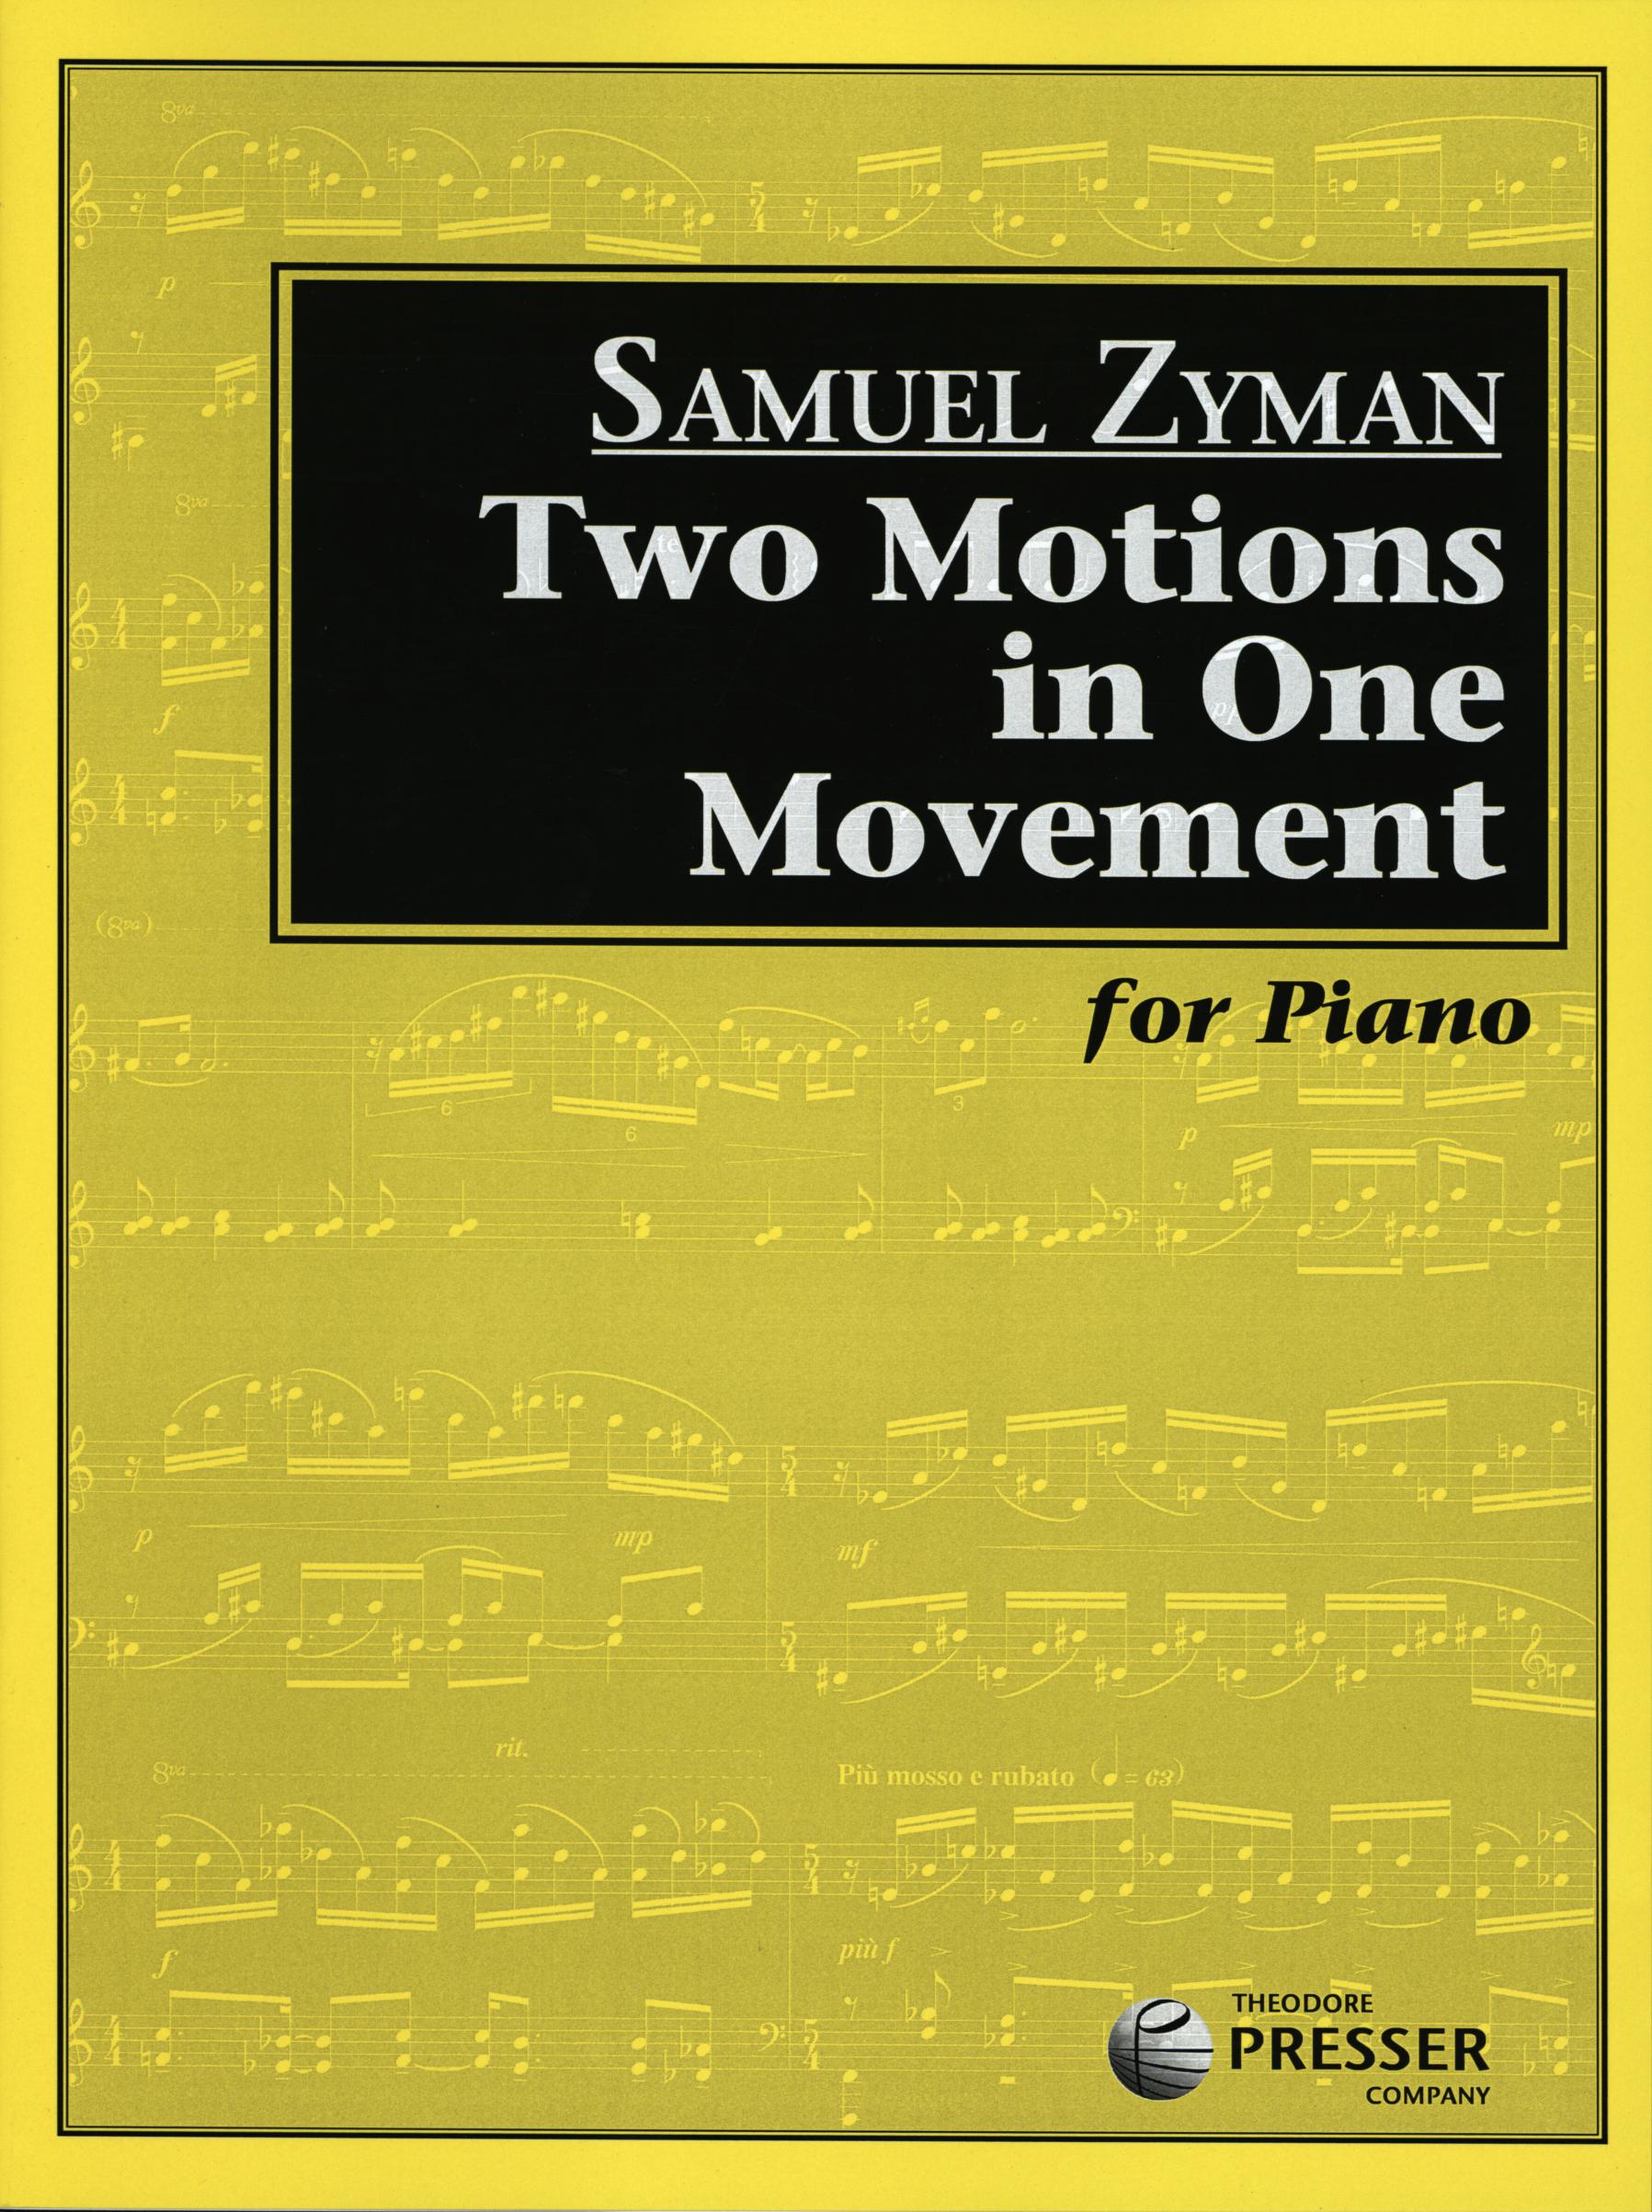 Zyman: Two Motions in One Movement